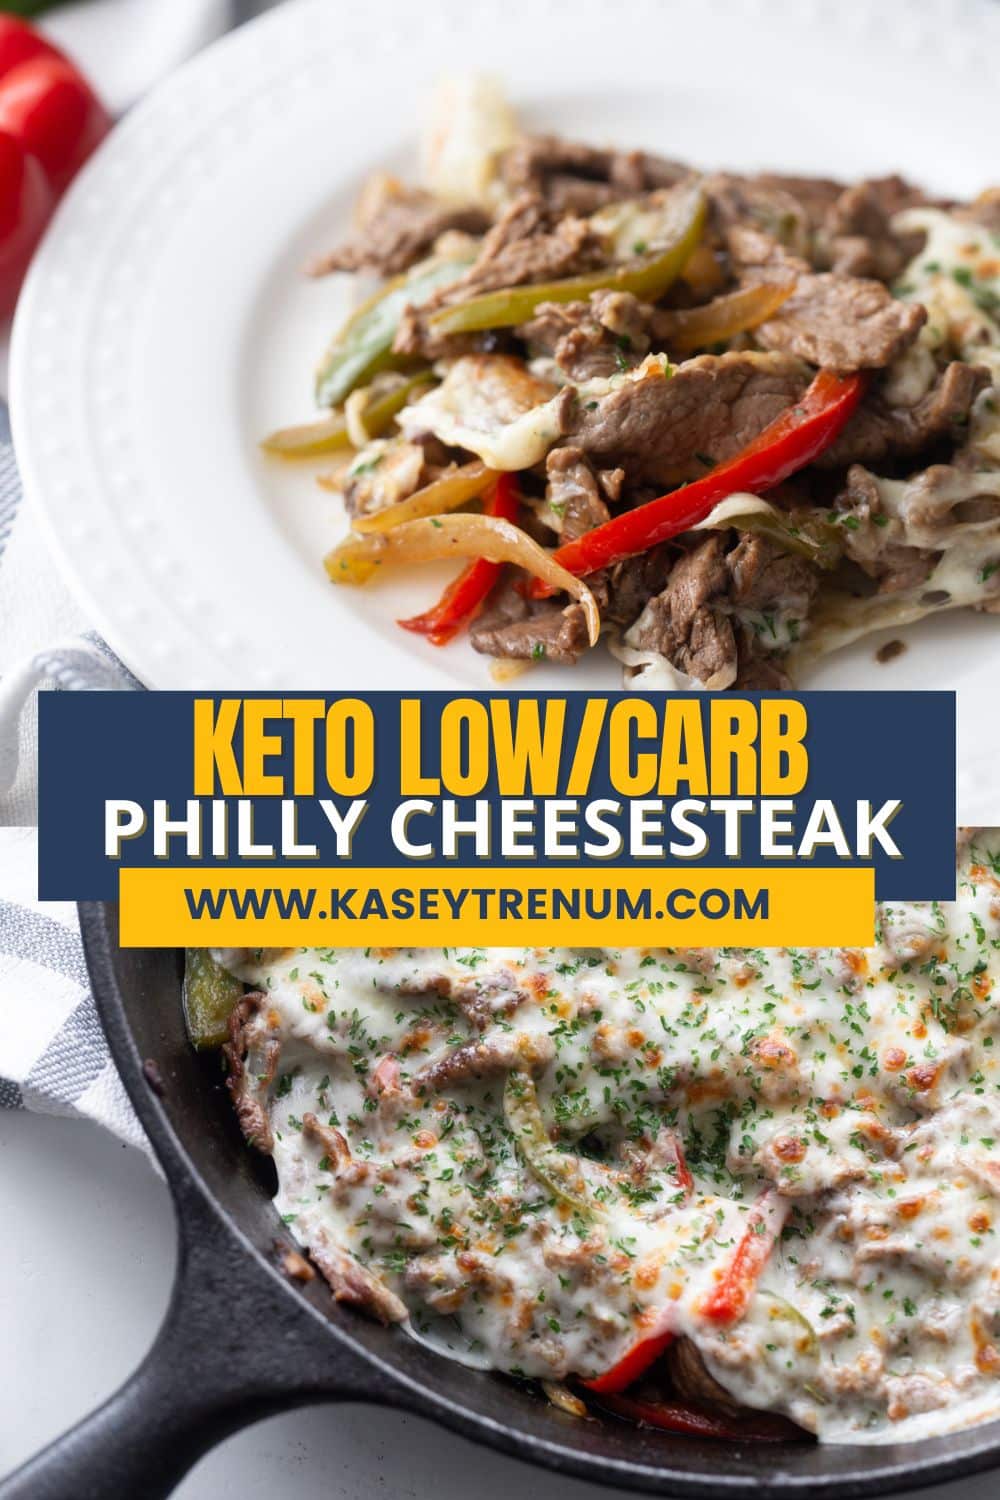 Collage image of finished philly cheesesteak keto casserole being served in cast iron skillet, with blue banner and yellow and white wording